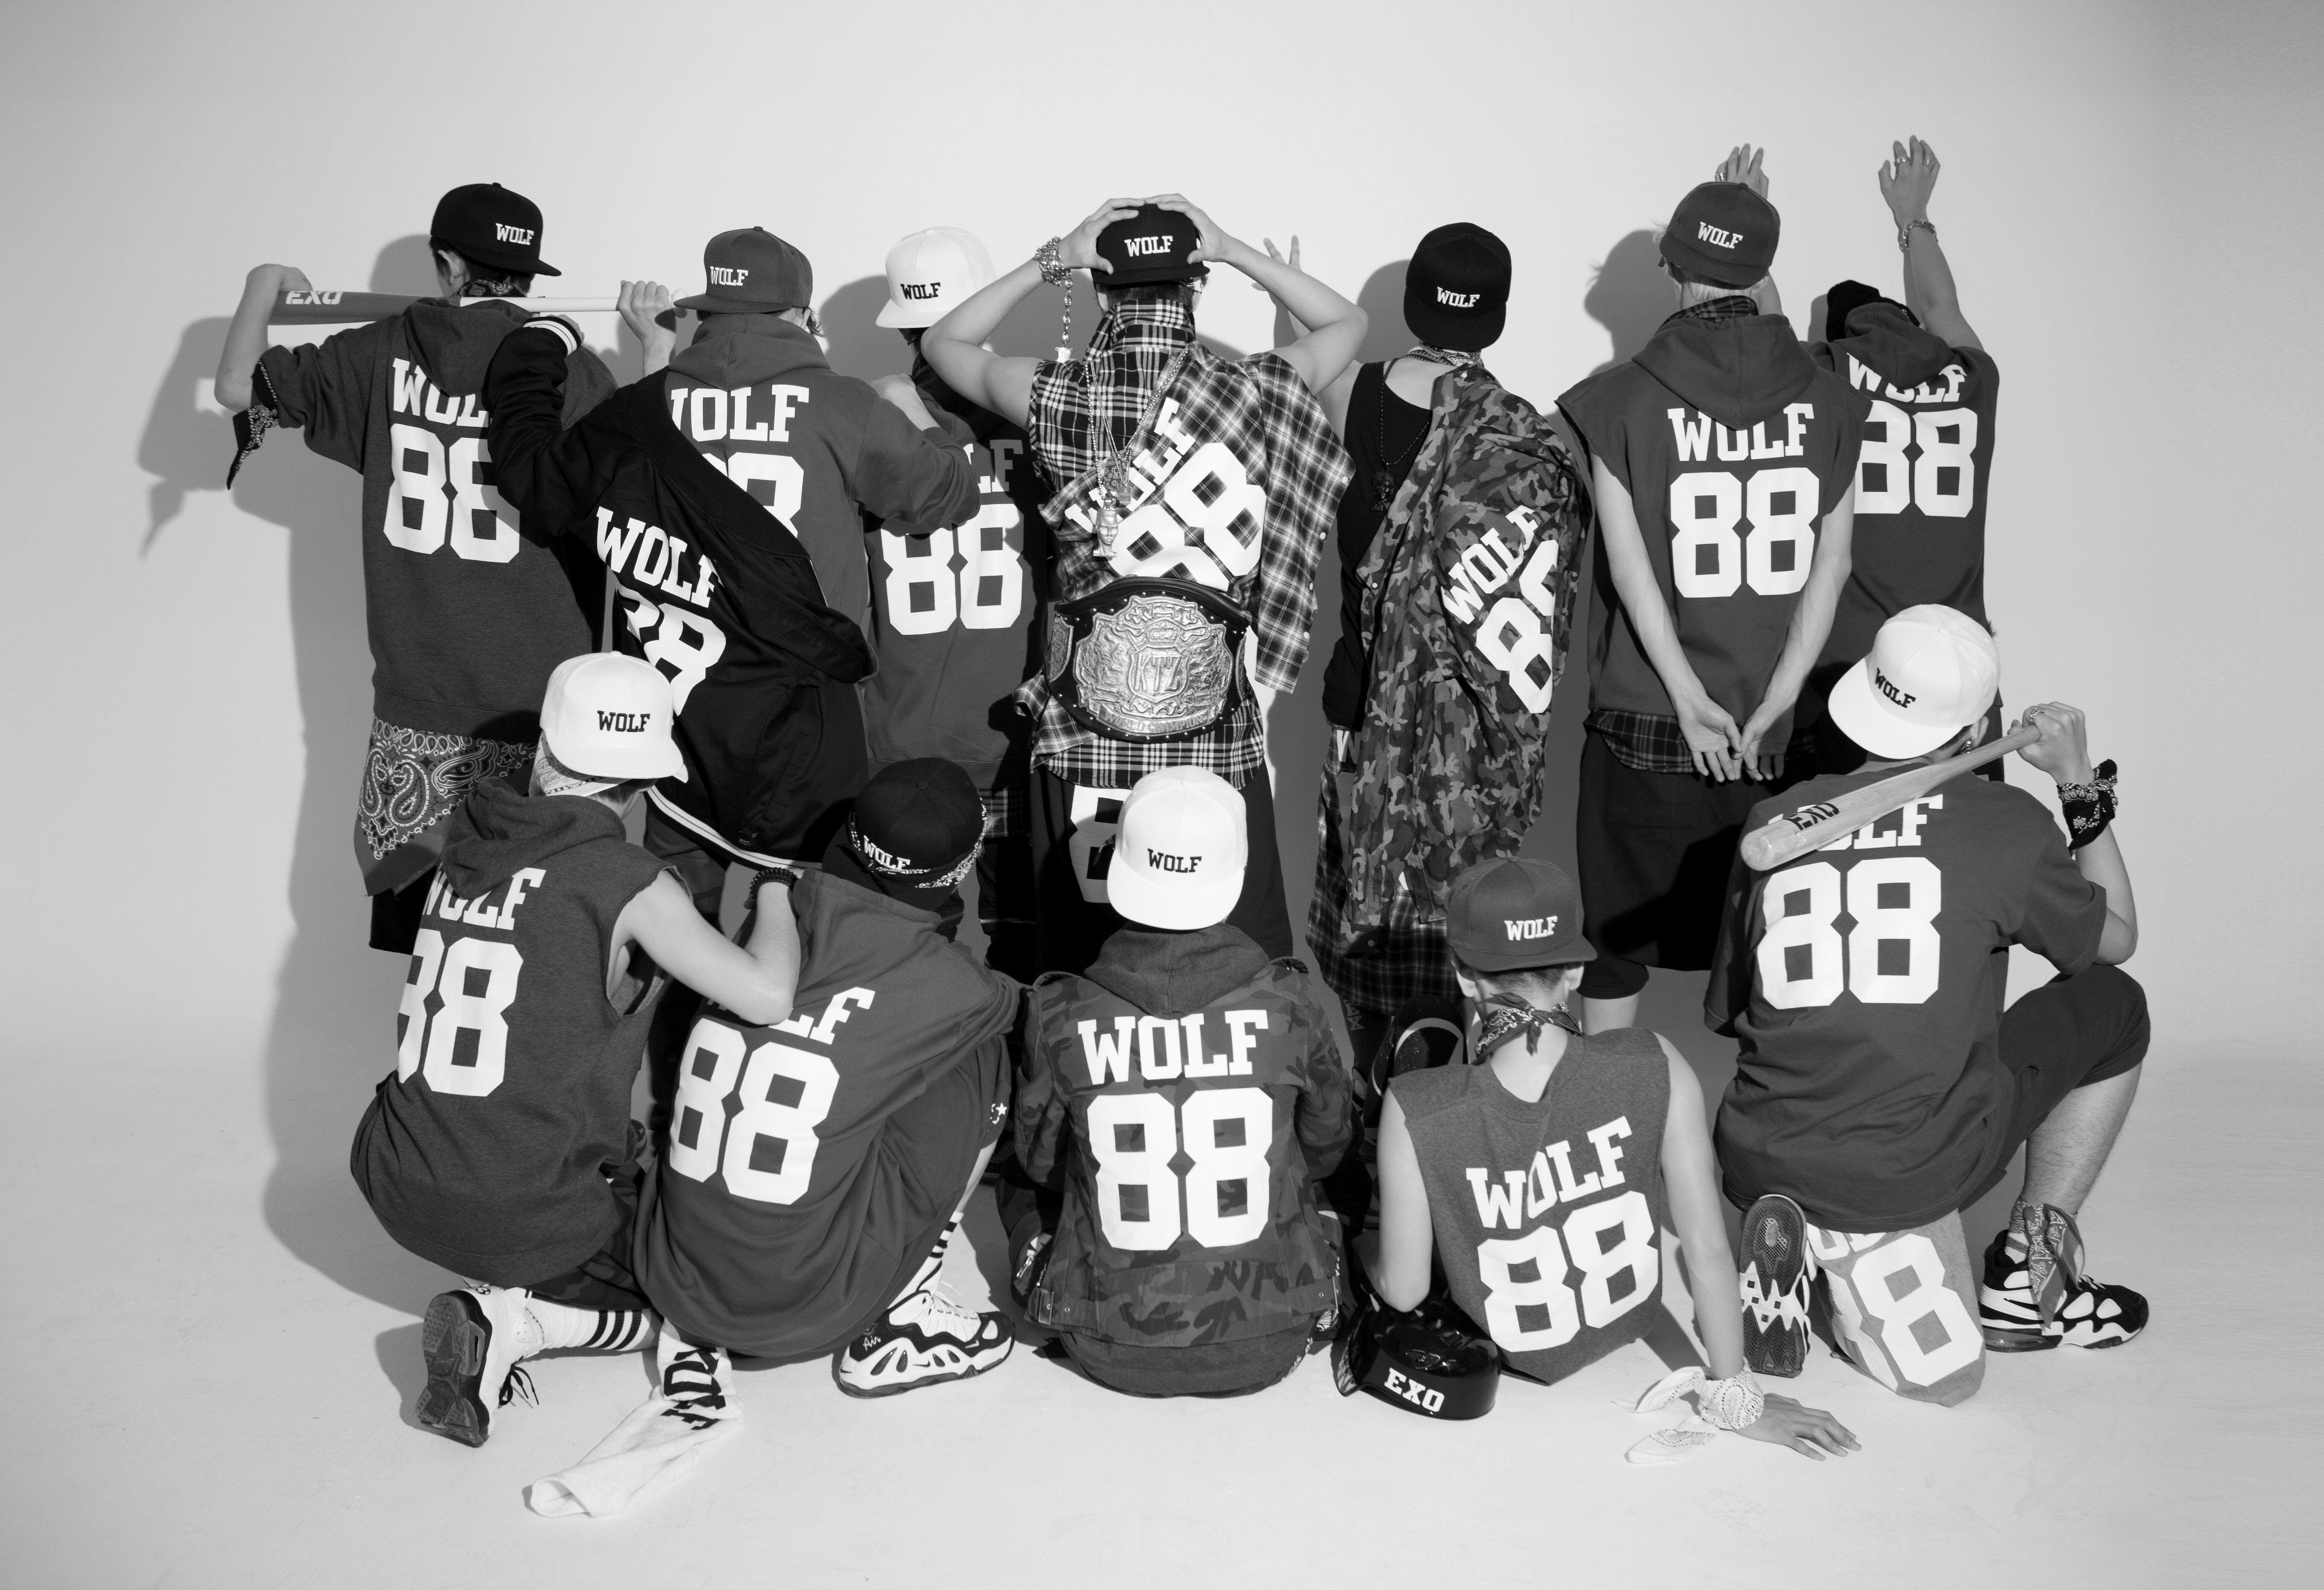 Exo HD Wallpaper and Background Image